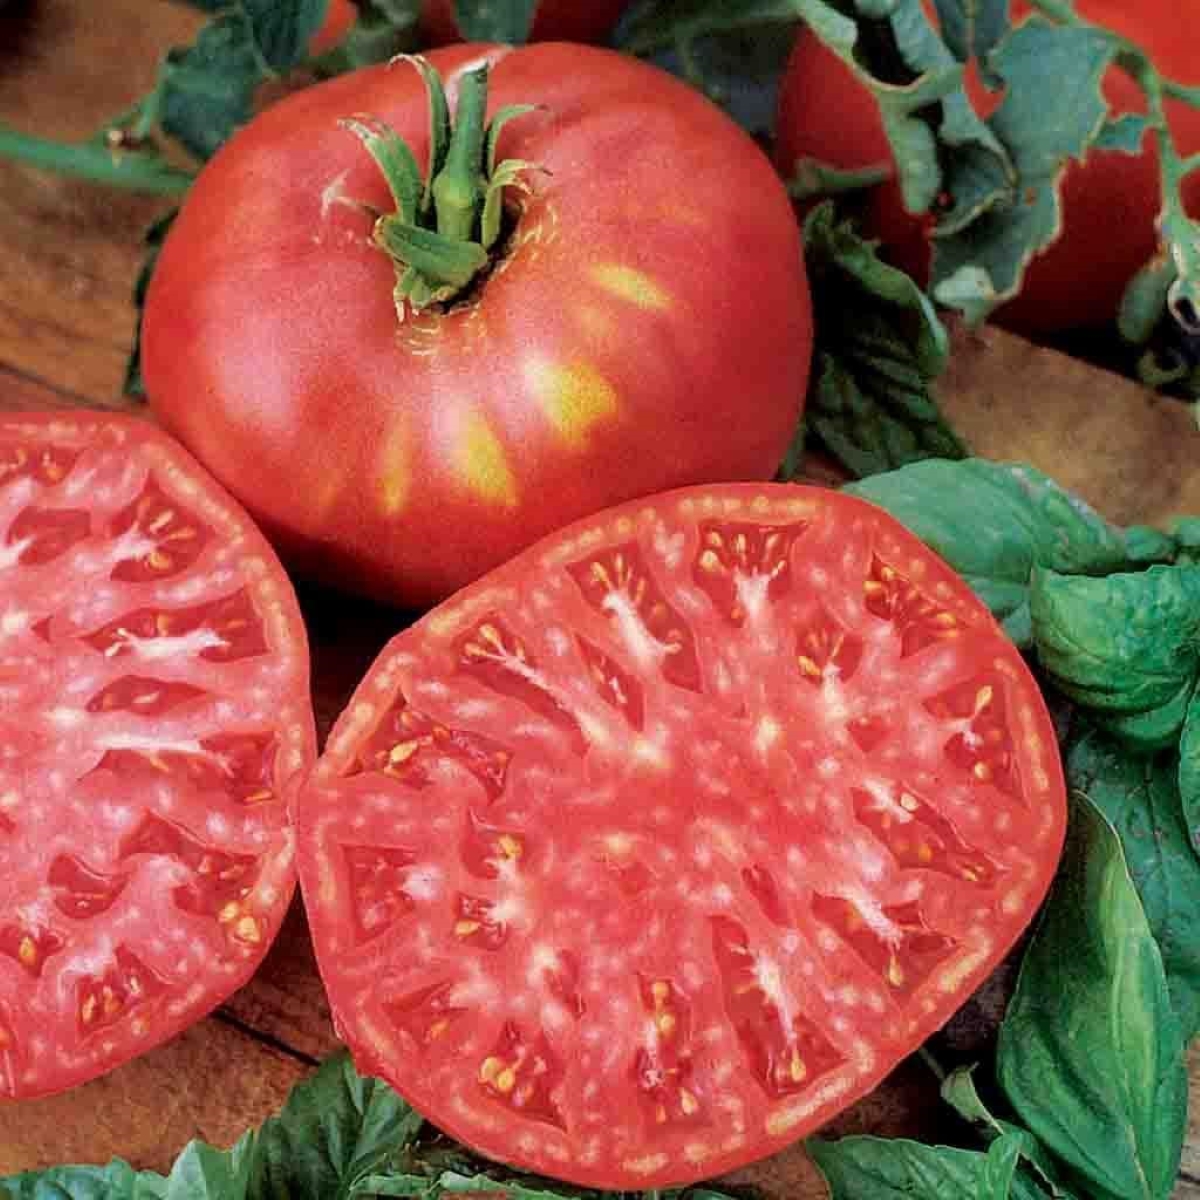 types of tomatoes - sliced red heirloom tomato